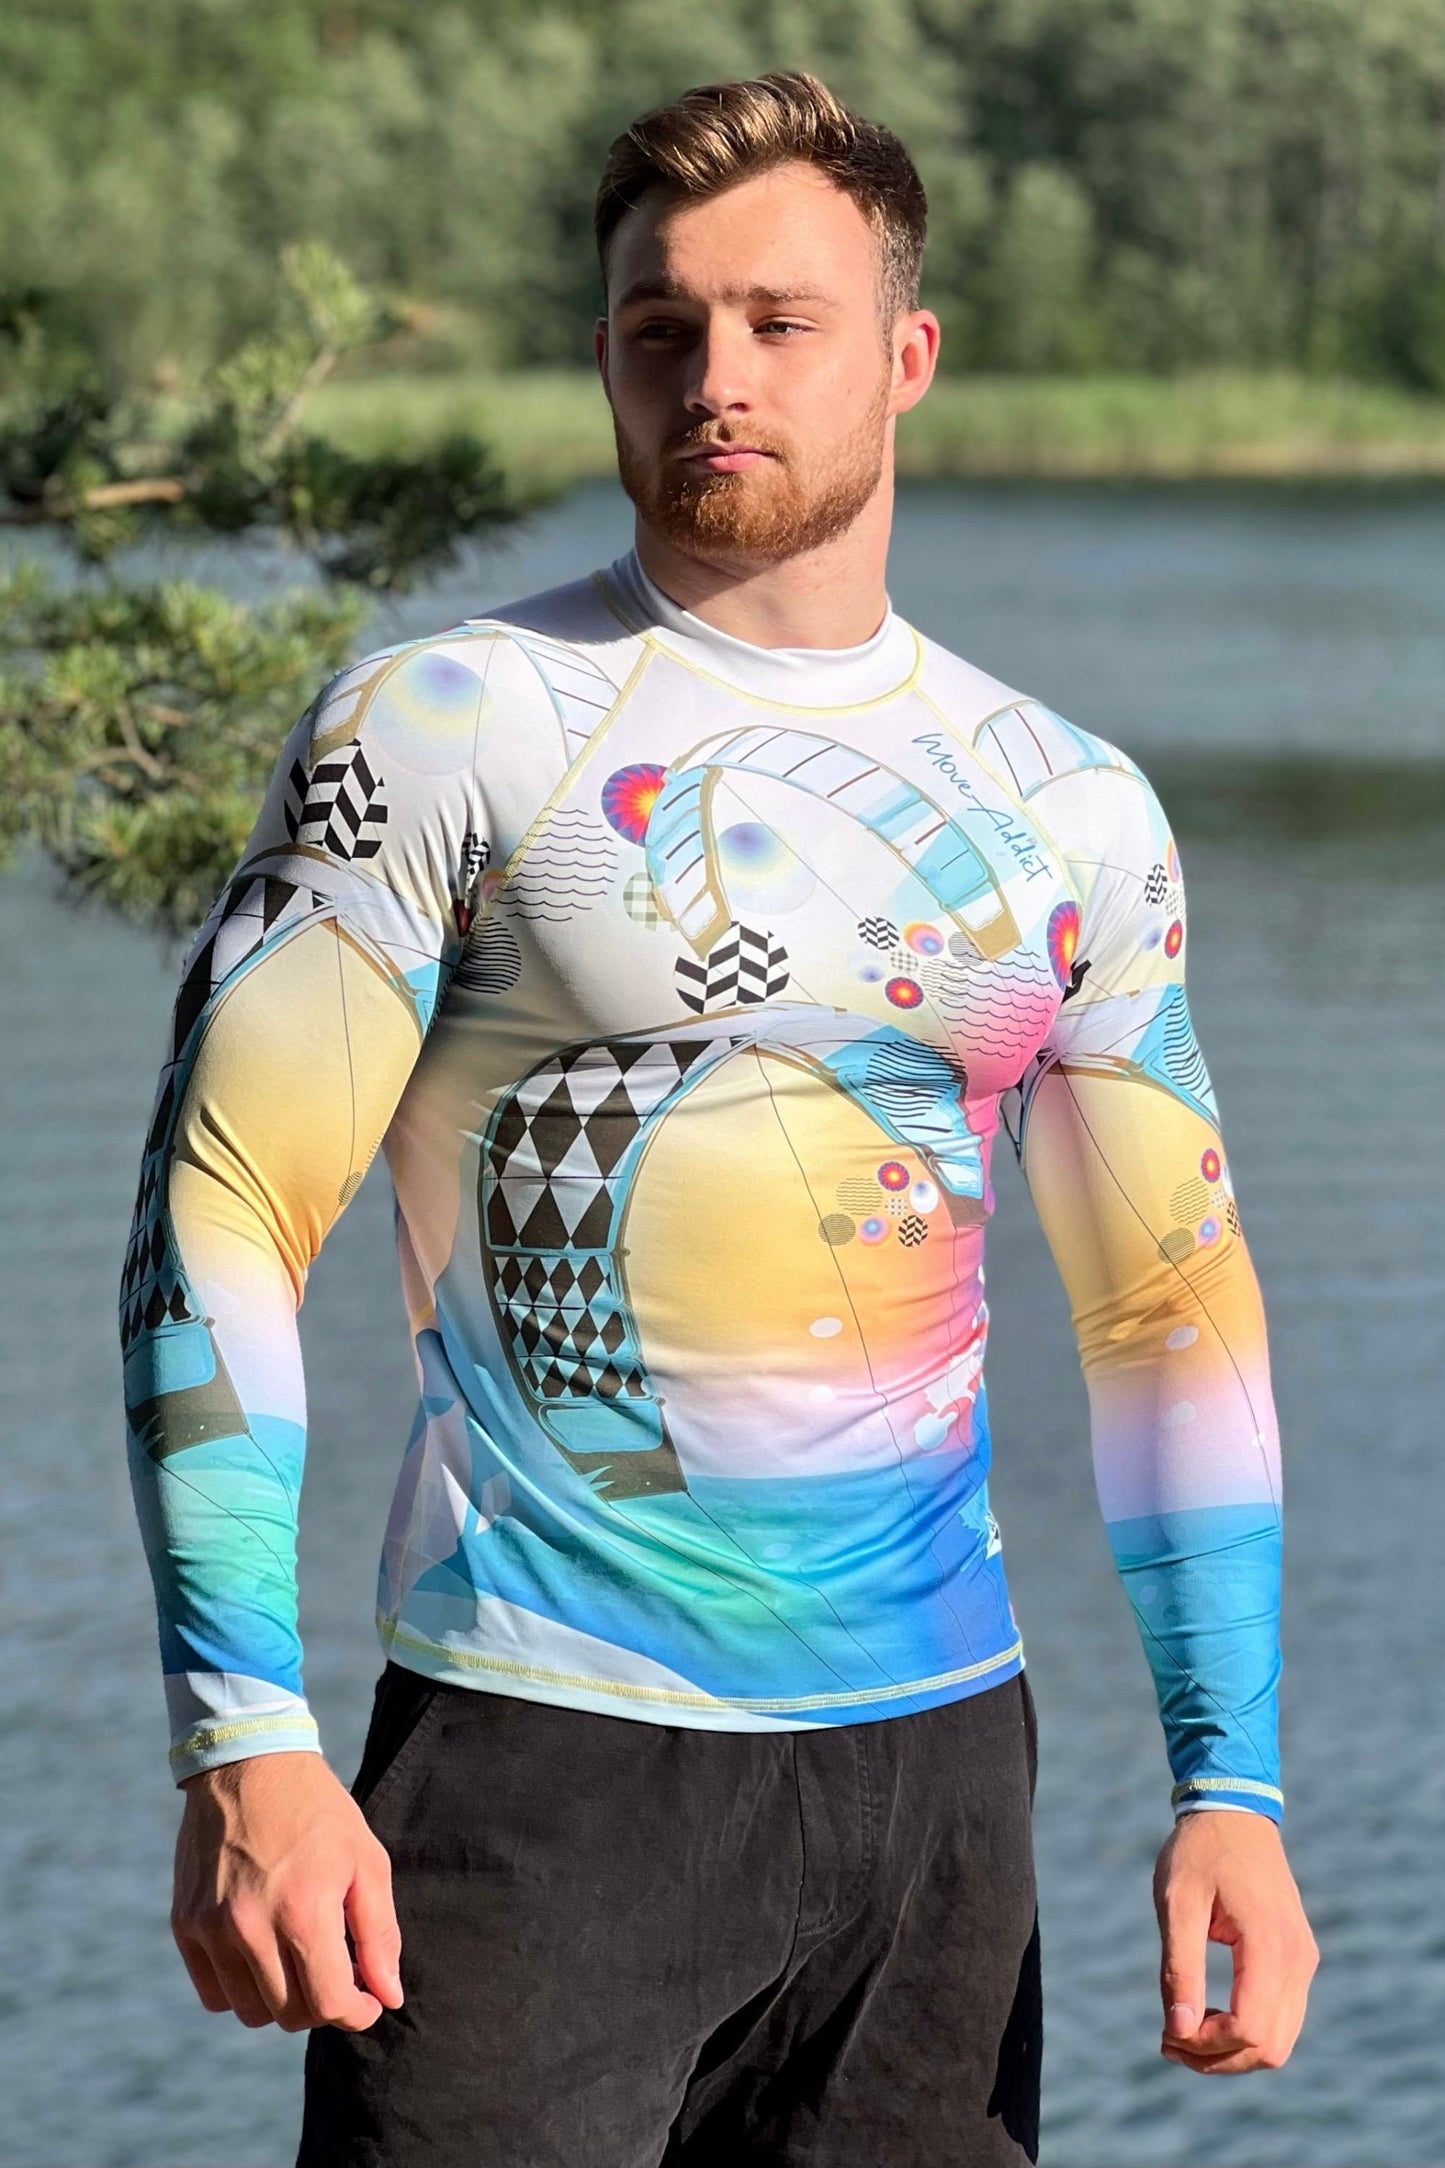 Men's Long Sleeve Rash Guard| For Water Sports| Men's Lycra| Summer water sports outfit| Active lifestyle| Sun and wind protection